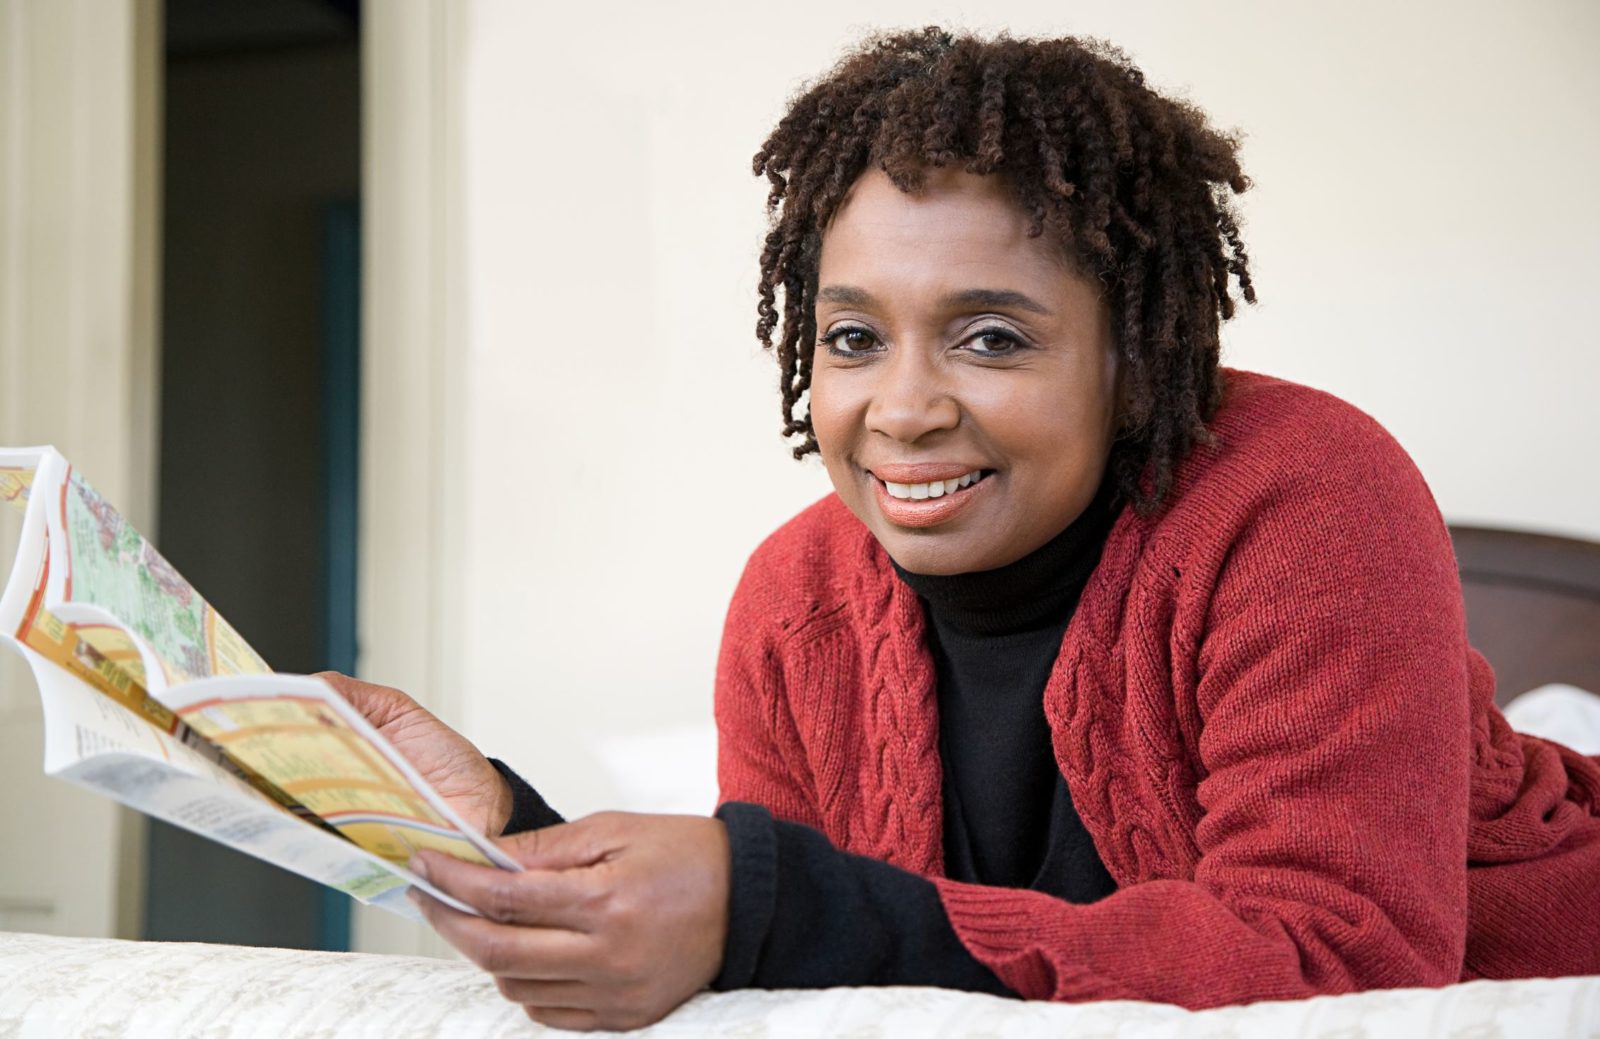 African American woman in a red sweater looks at a map and smiles at the camera